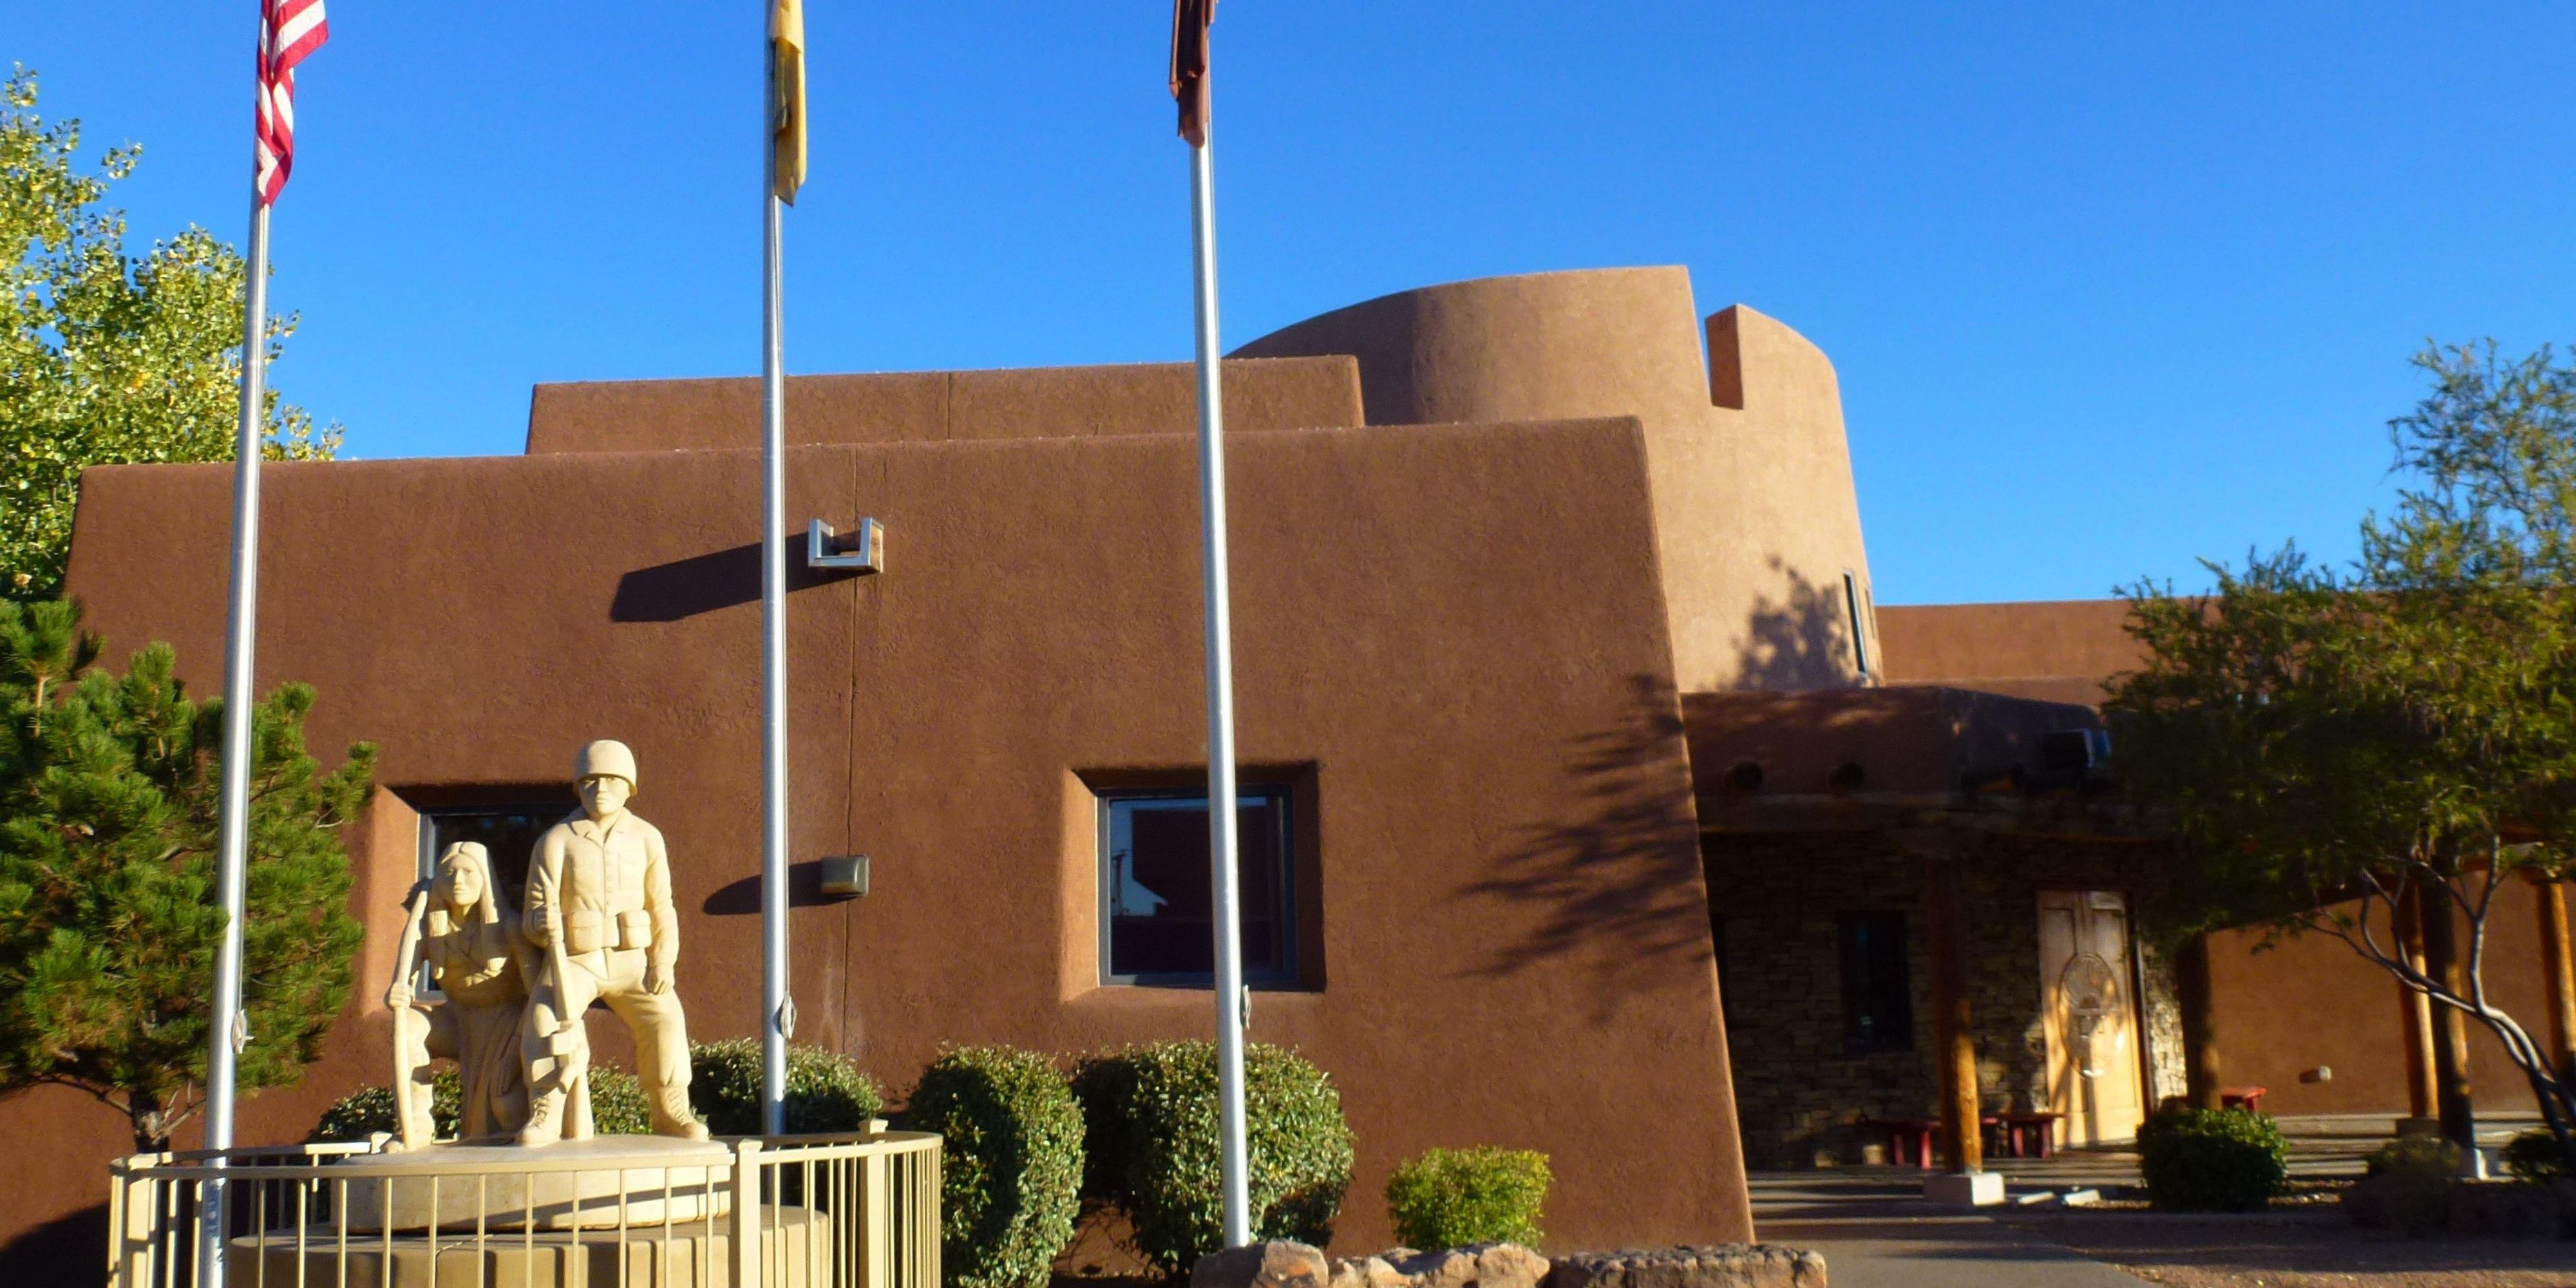 We are across the street from the Indian Pueblo Cultural Center, your gateway to the 19 Pueblos of NM! Experience the rich history and varied cultures of the Pueblos in New Mexico at the IPCC's world-class museum, enjoy native foods in the restaurant, or shop for Native American art, jewelry and pottery. Live dancing and musical events on weekends!